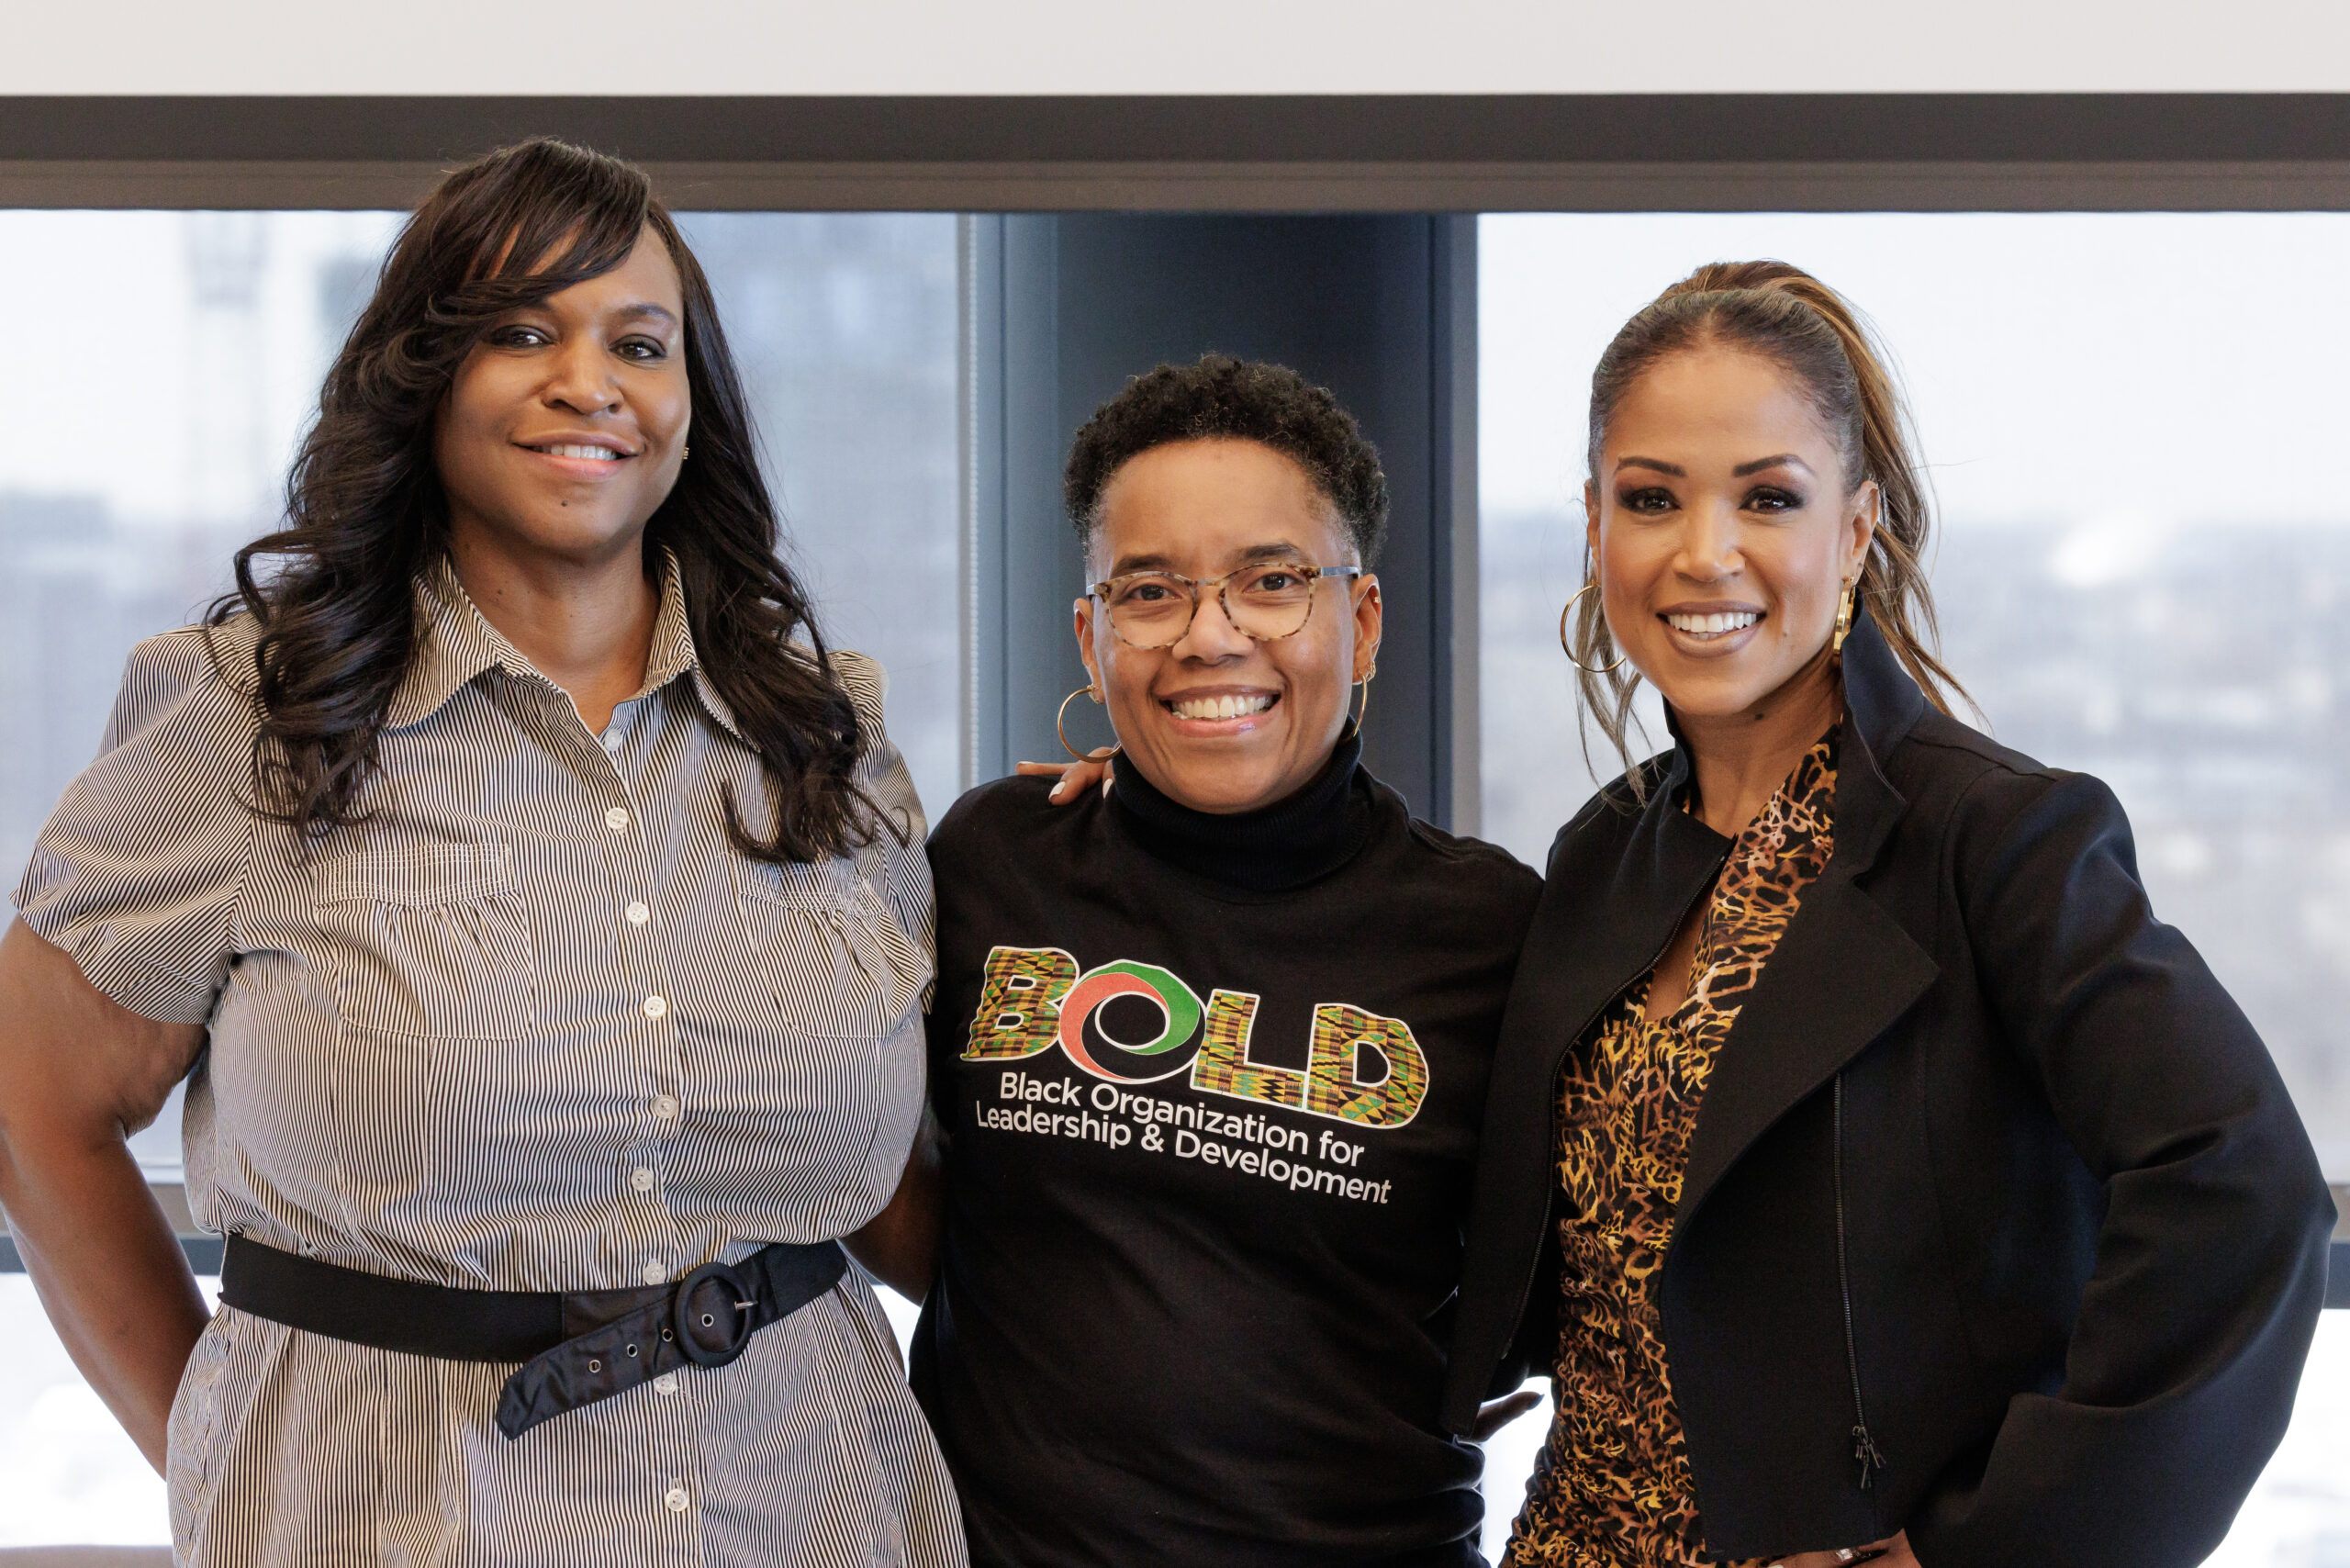 two women members of the BOLD team posing with Val for a photo